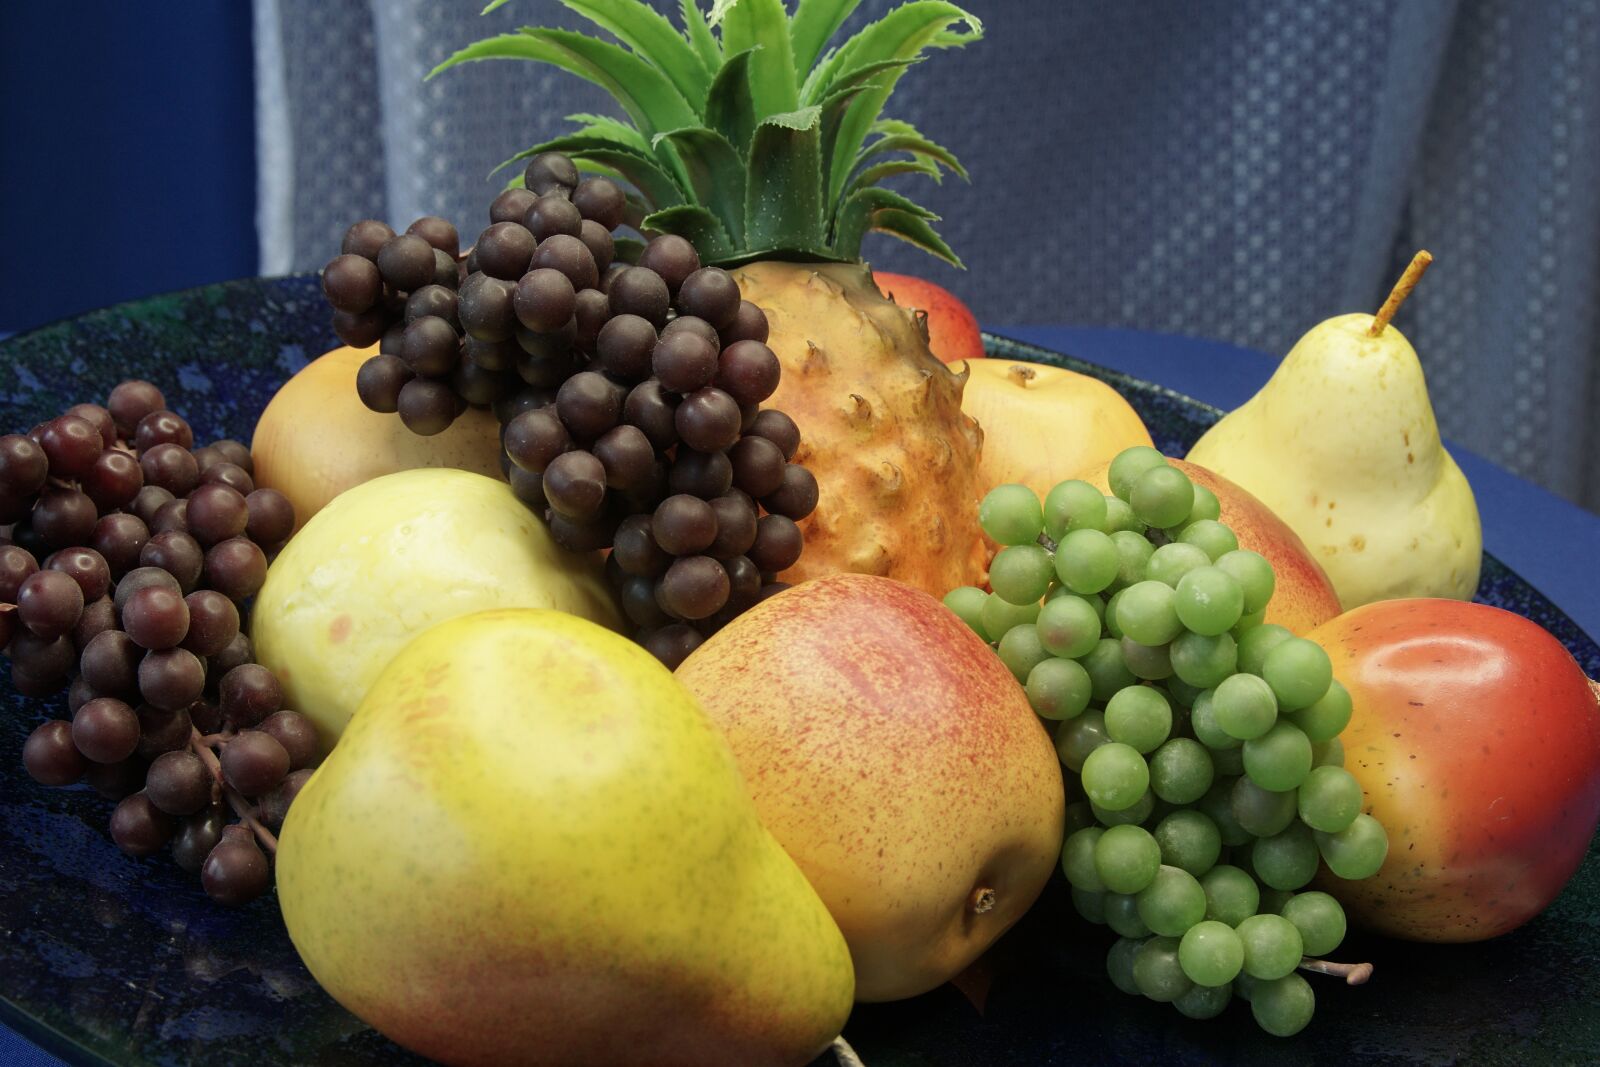 17-50mm F2.8 sample photo. Fruit, grapes, pears photography